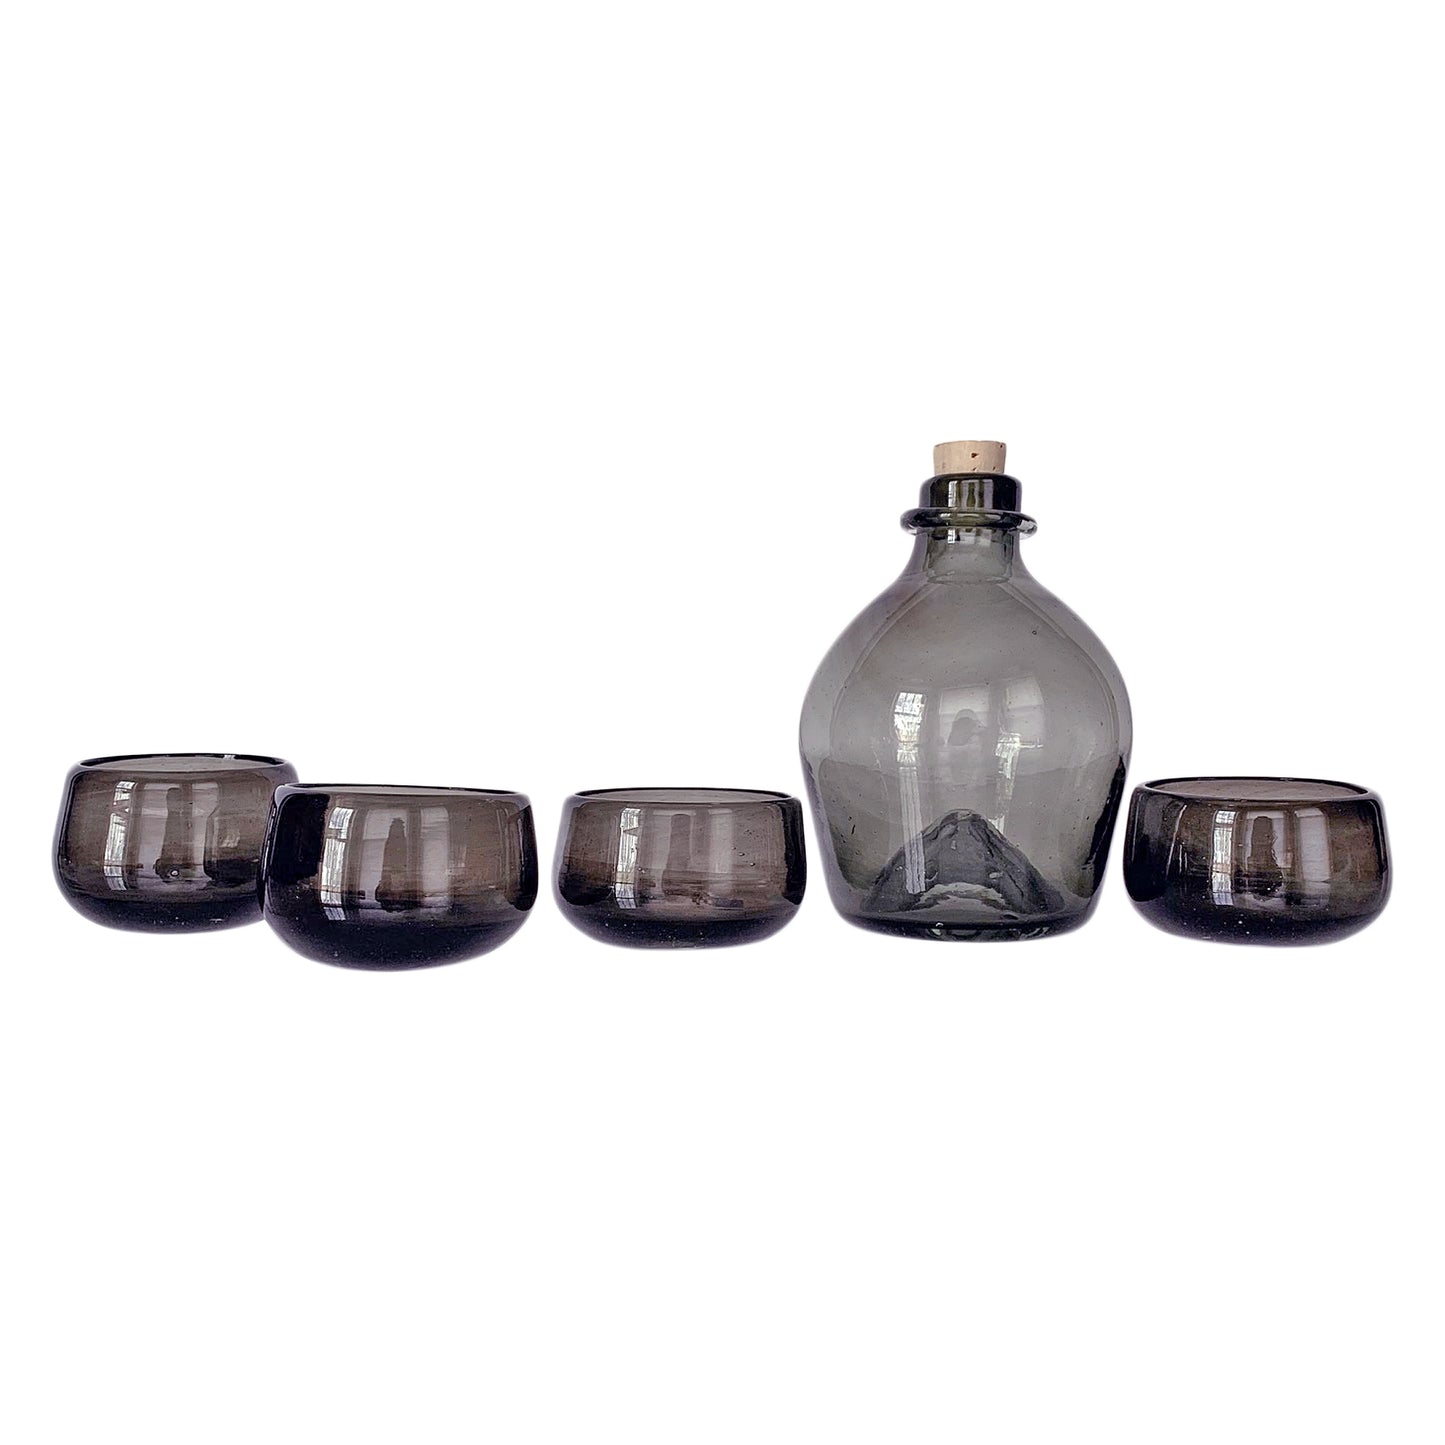 Hand Blown Mexican Glass Decanter Set for Mezcal or Tequila | Includes (1) Bottle + (4) Mezcal Copitas | Handmade in Mexico (Available in Clear, Smoke + Amber)